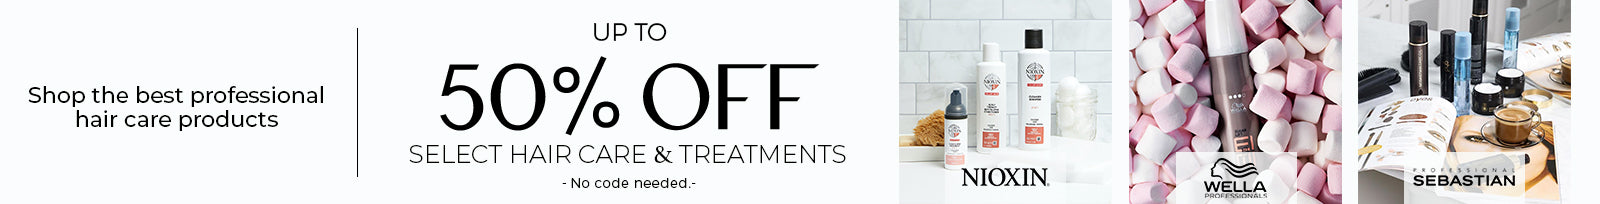 Up to 50% off Hair